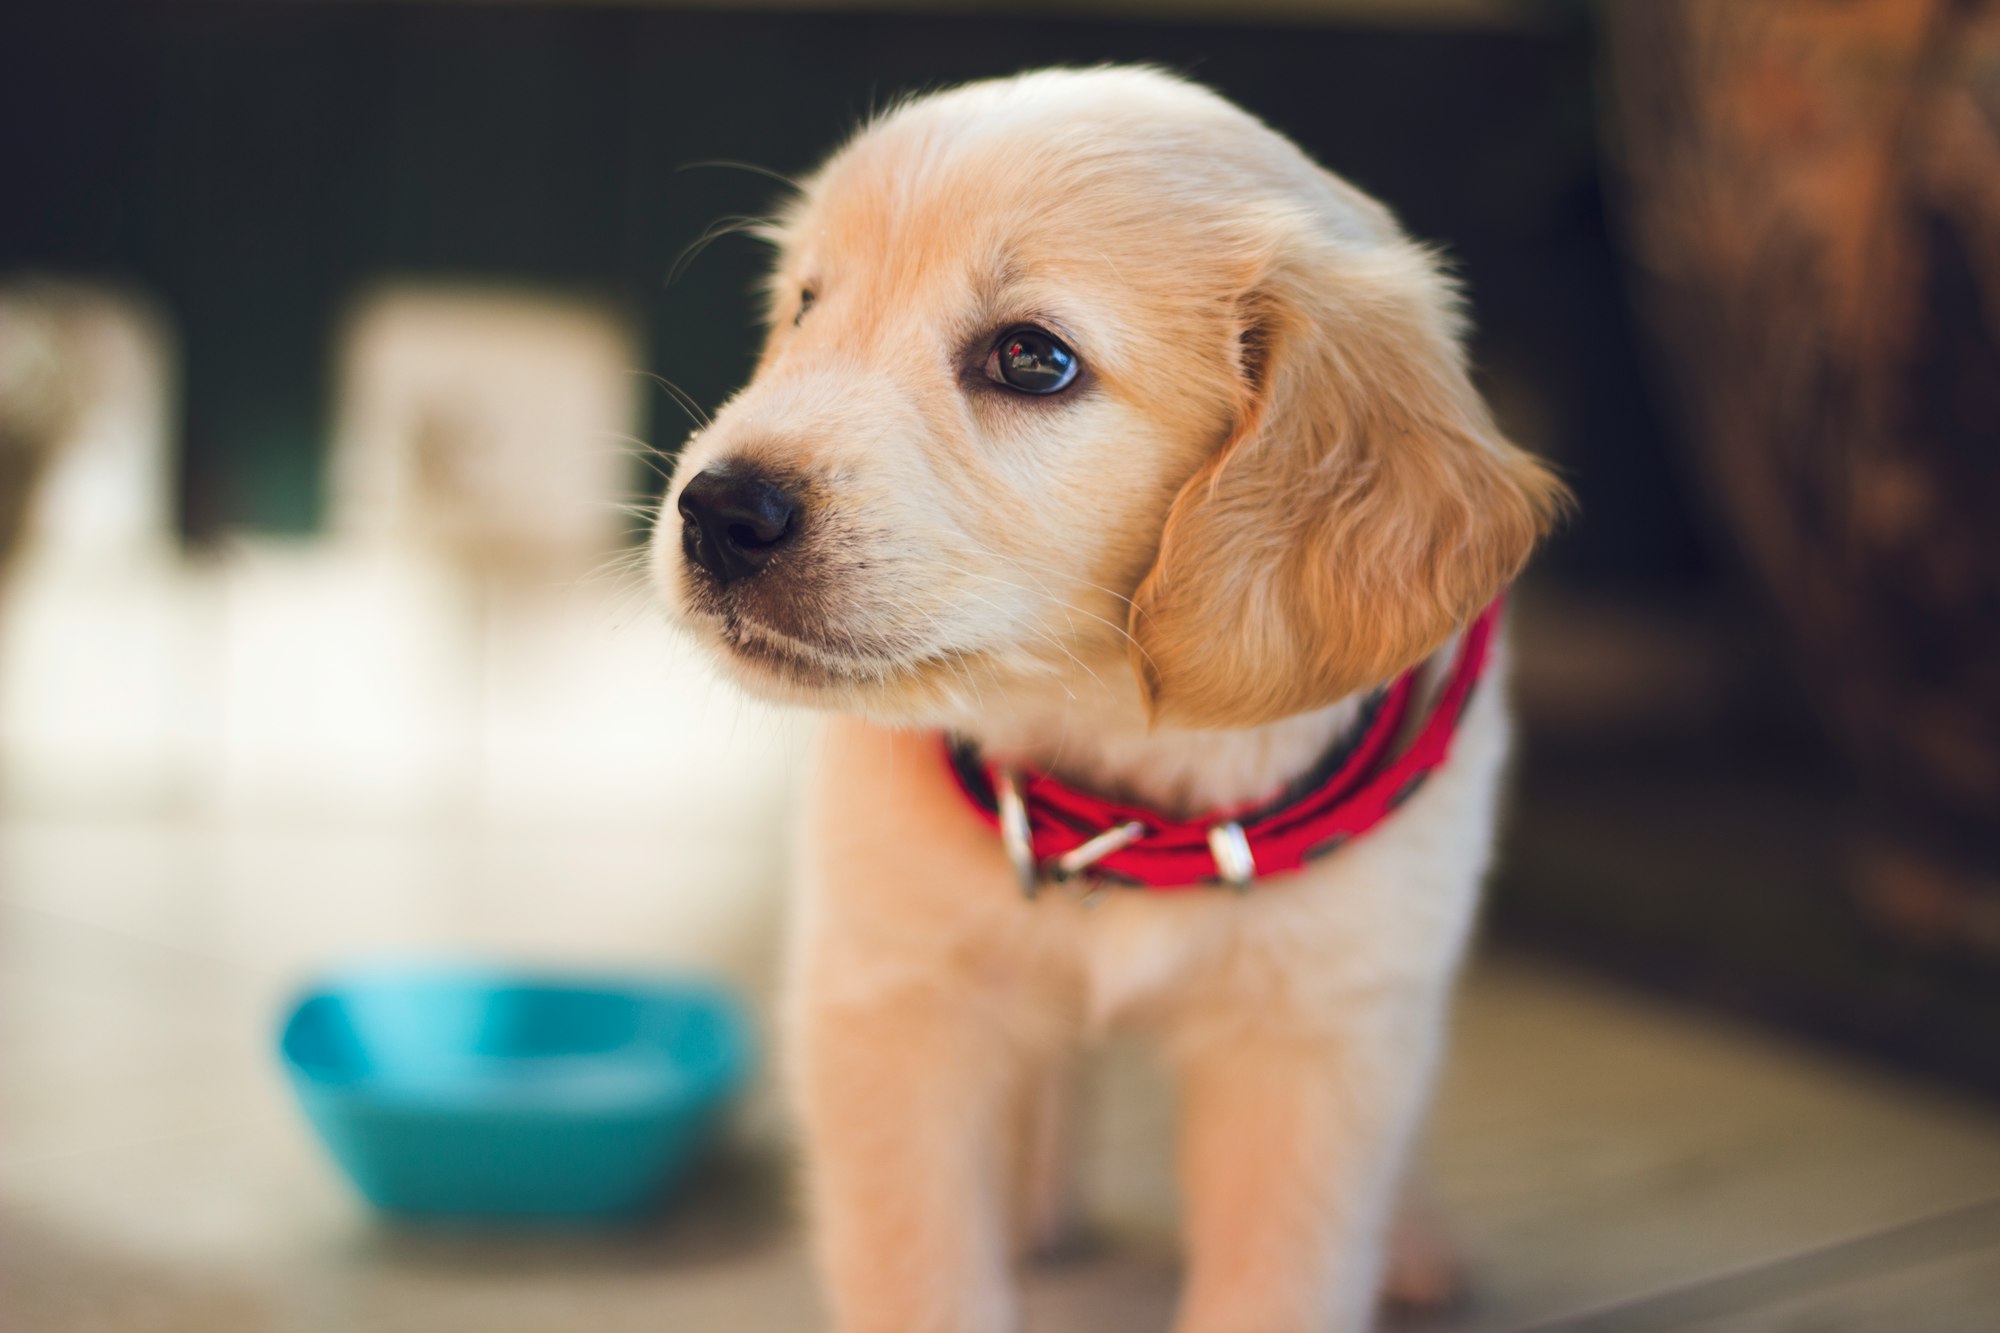 10 ideas for what to do with your puppy while you're at work